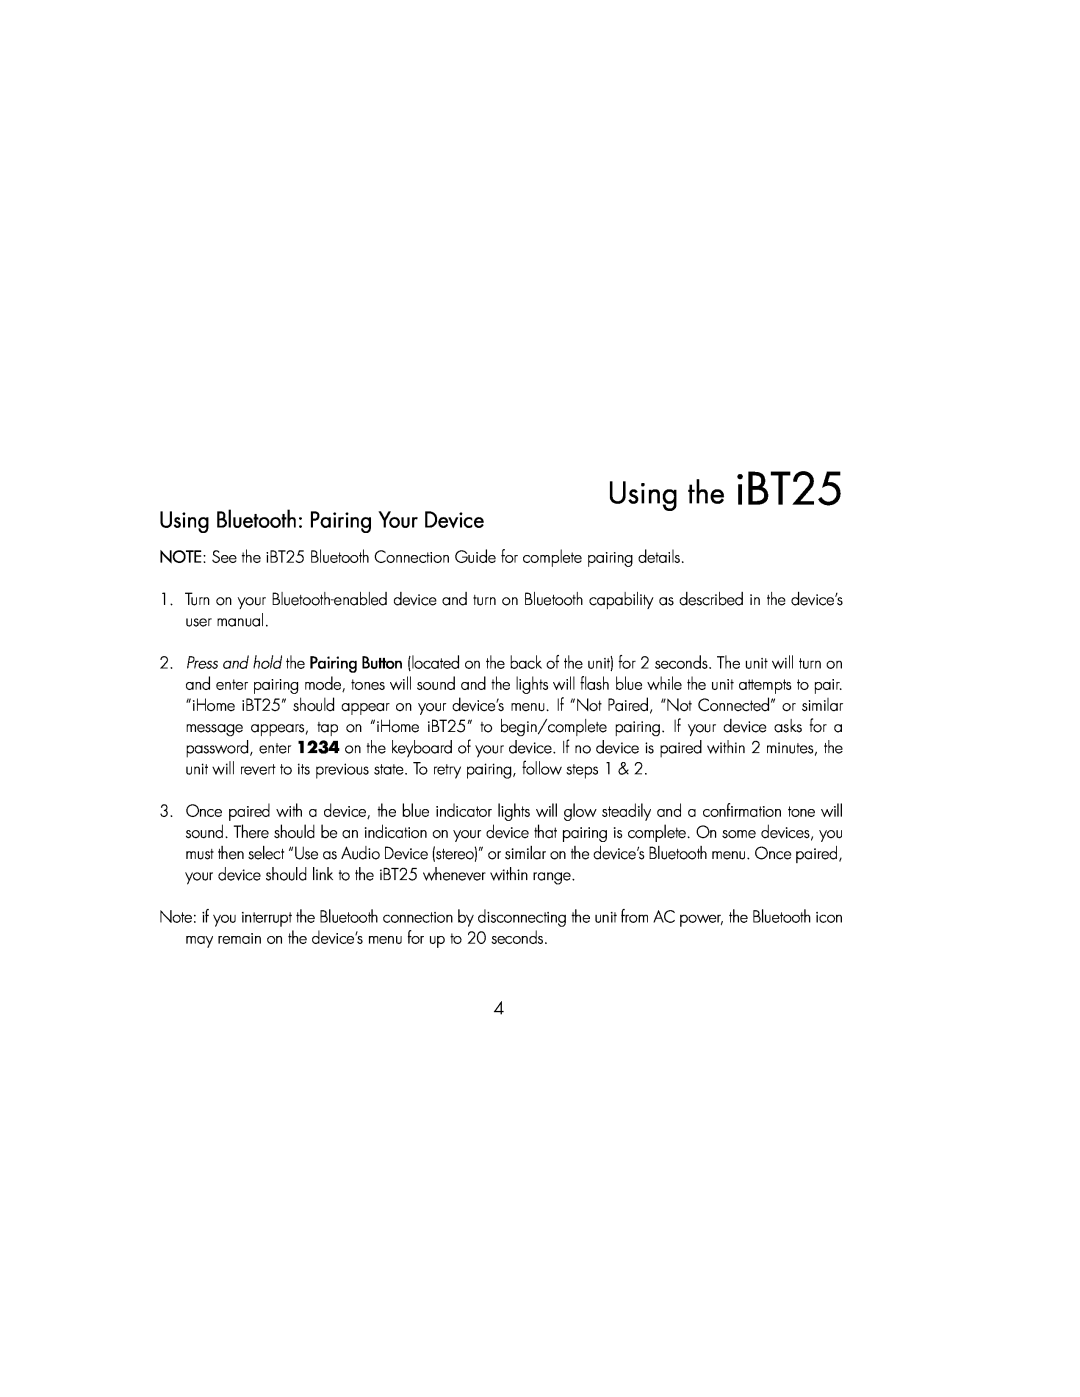 iHome IBT25BC instruction manual Using Bluetooth: Pairing Your Device, Using the iBT25 